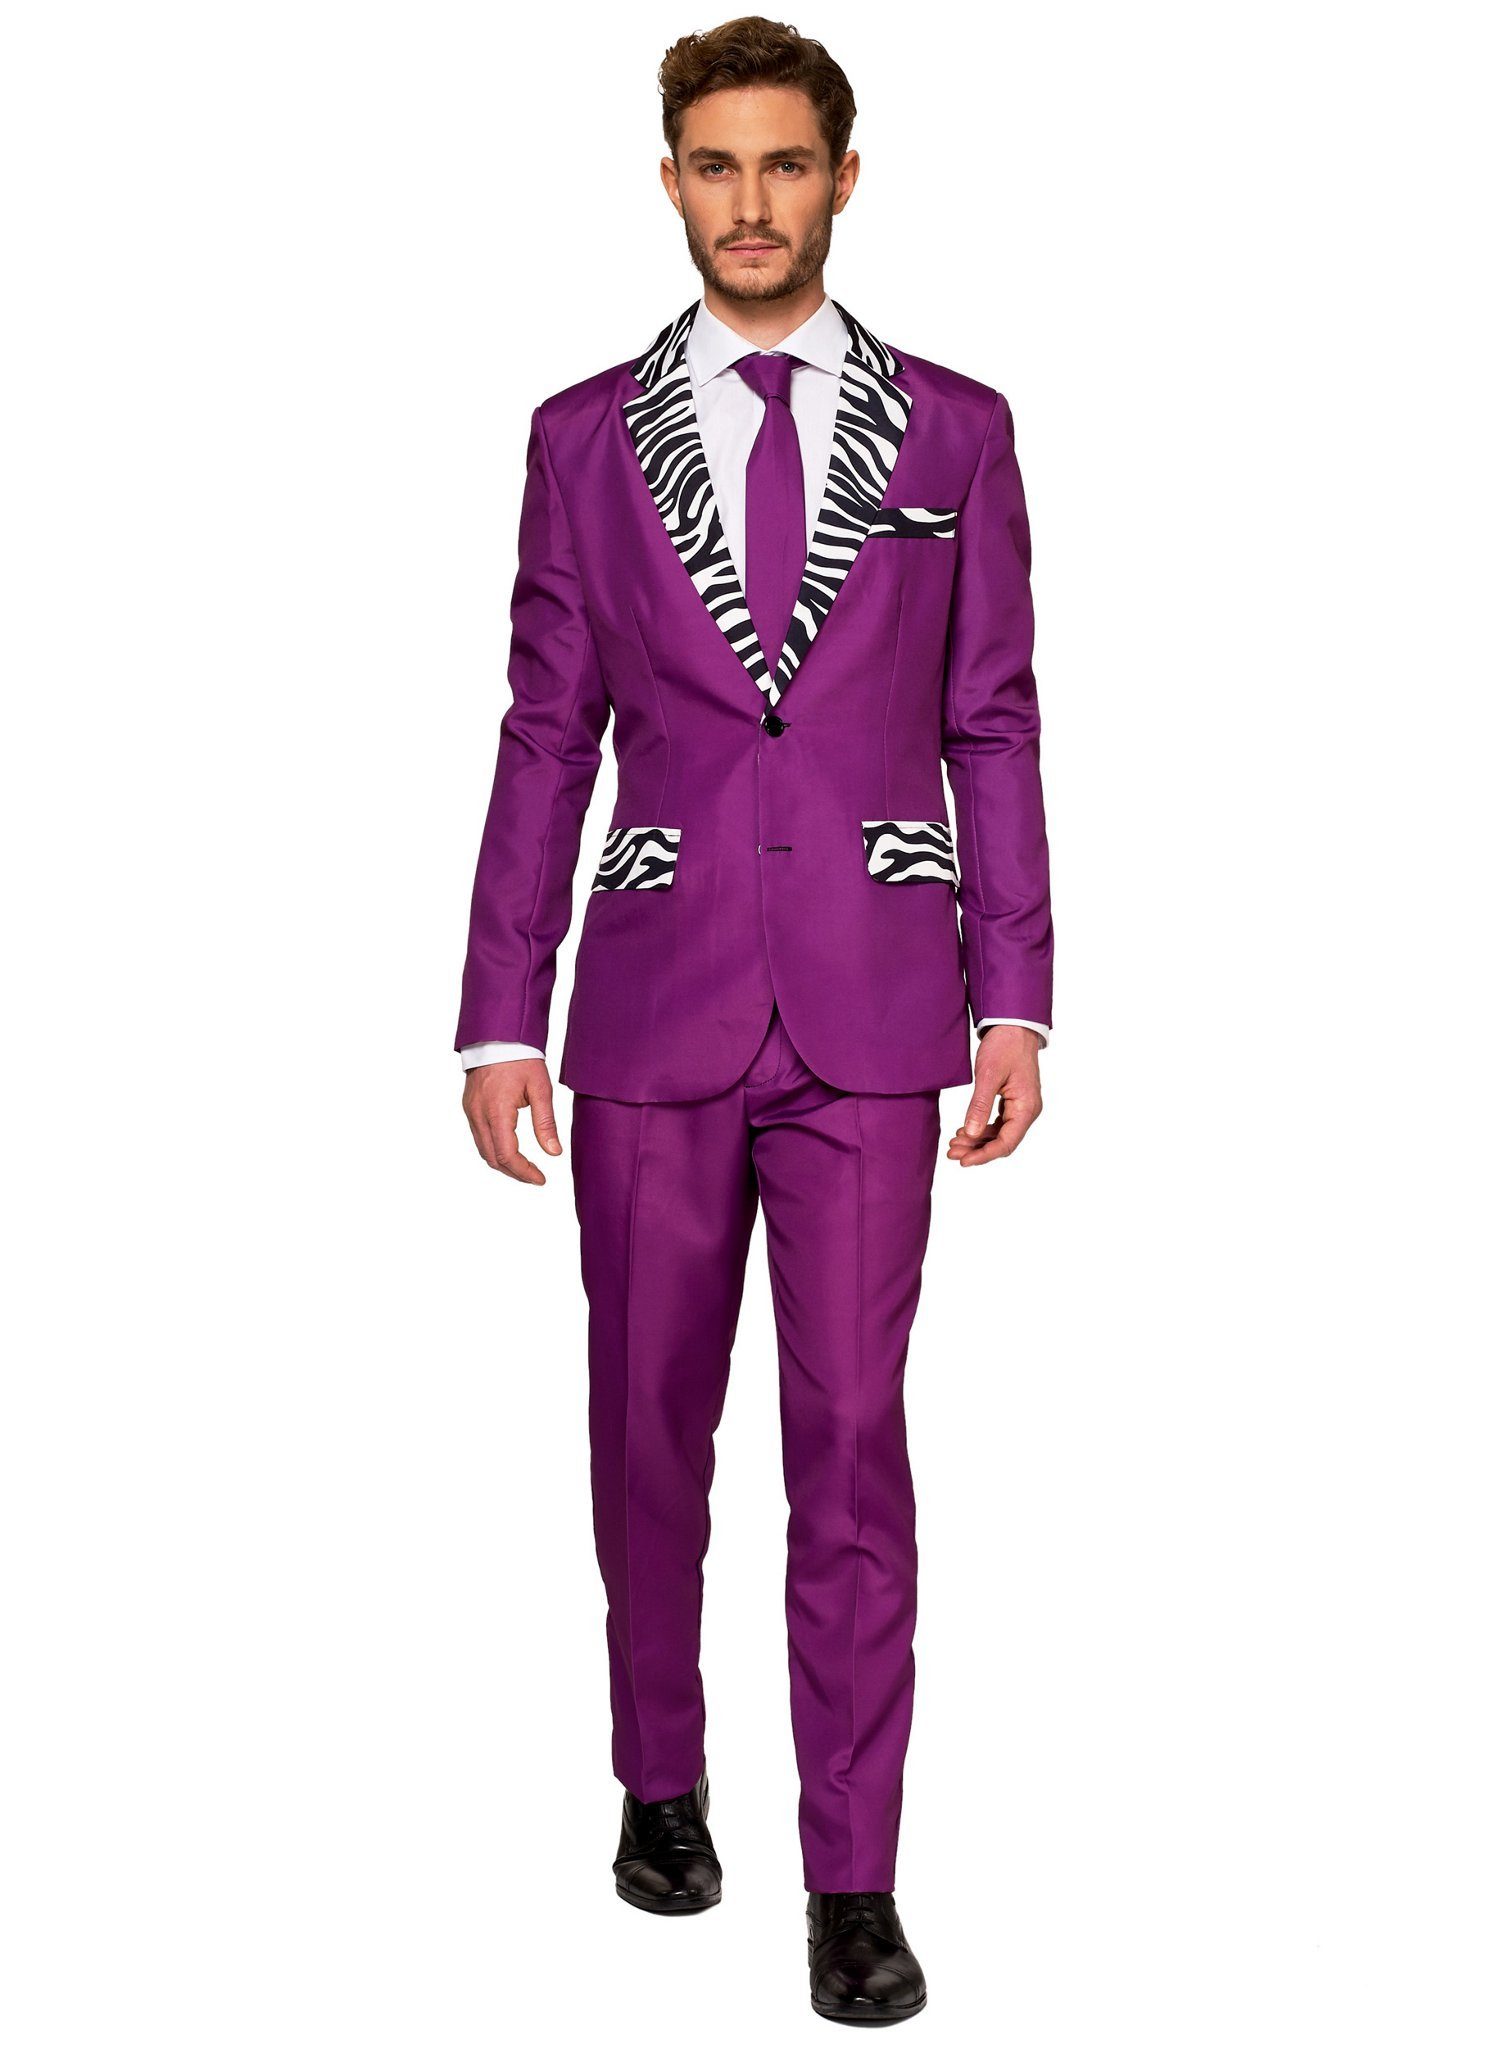 Opposuits Partyanzug SuitMeister Pimp, How it feels to be with a P-I-M-P?